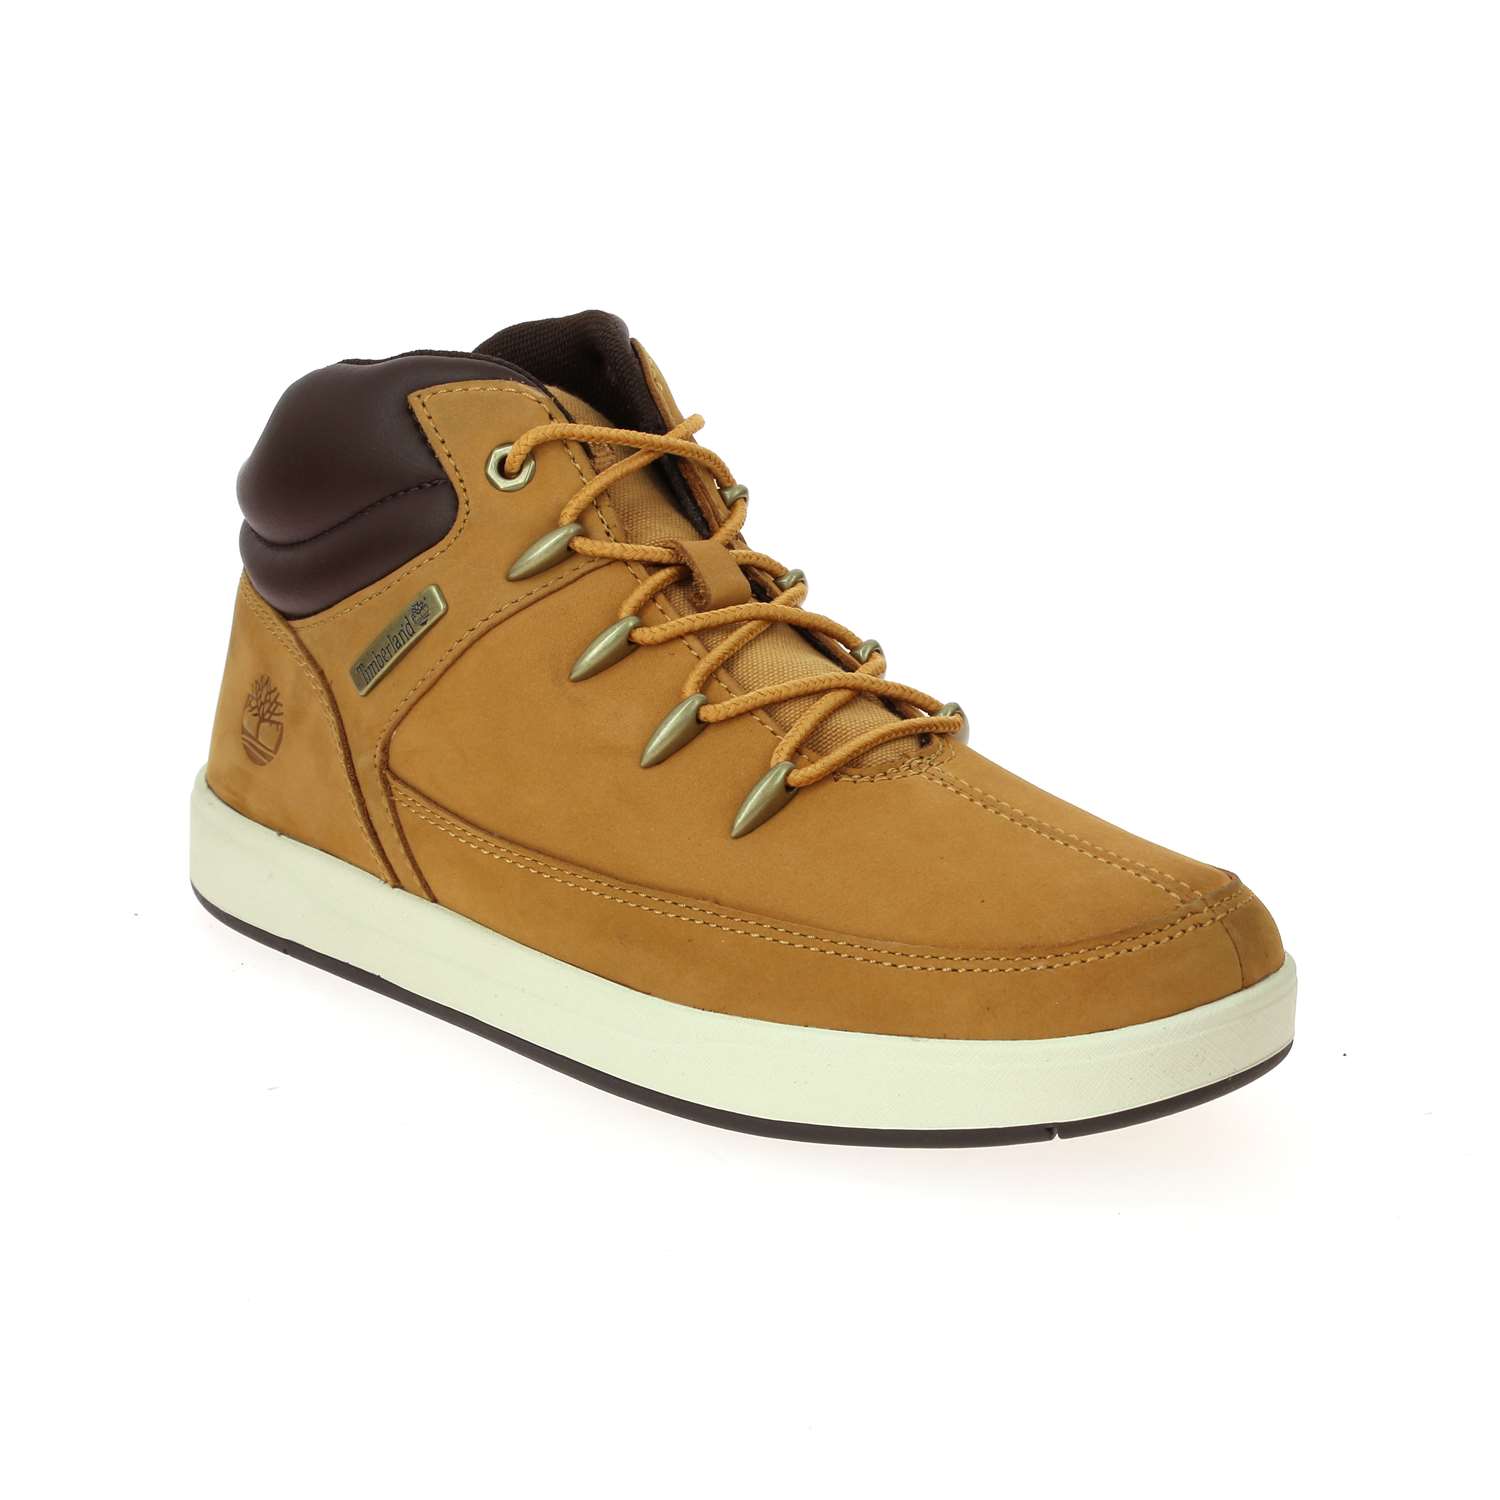 1 - DAVIS SQUARE - TIMBERLAND - Chaussures montantes - Cuir / textile